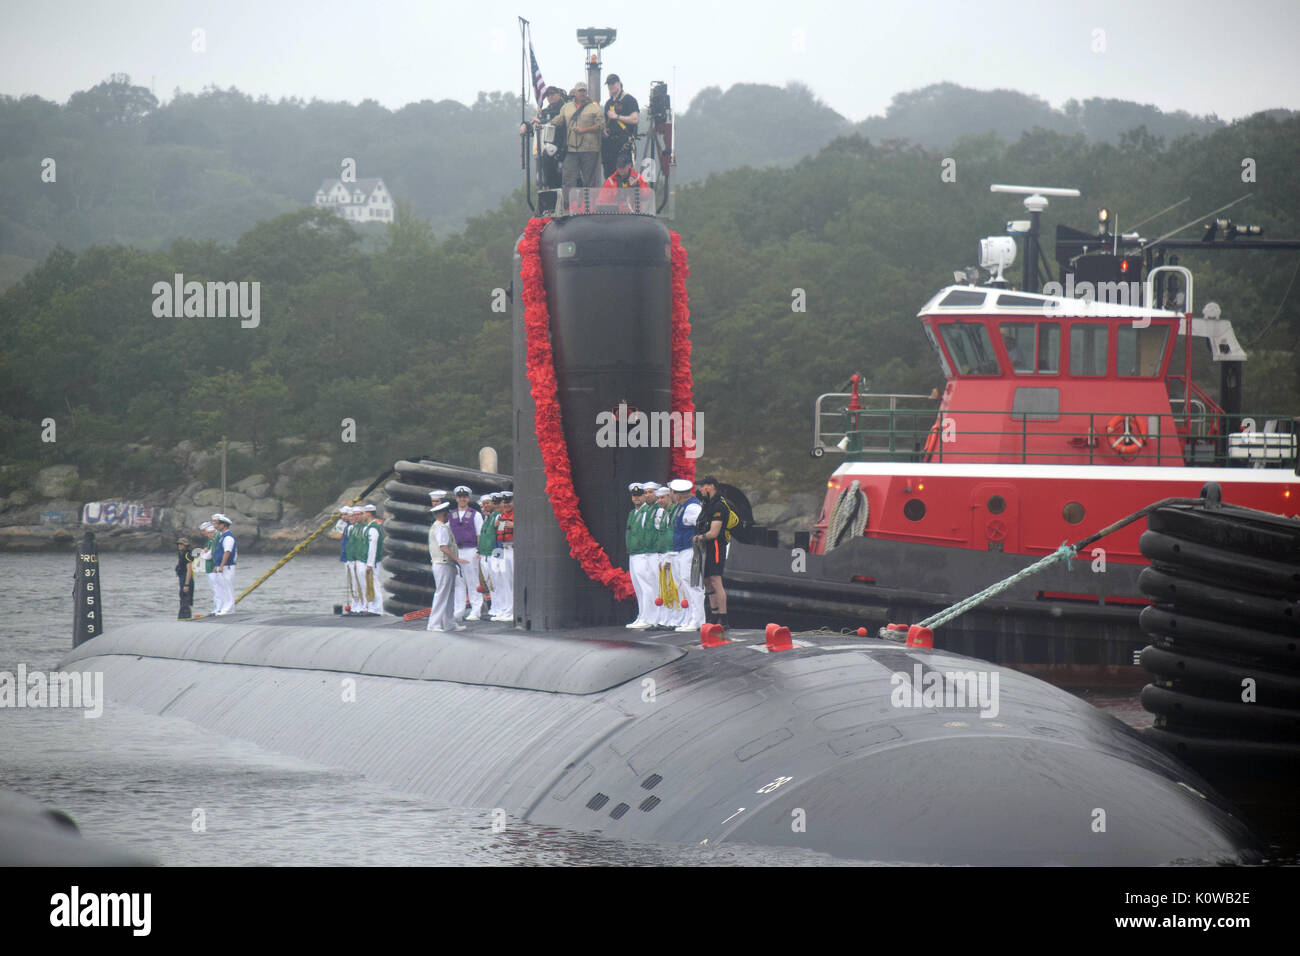 170818-N-BK361-093  GROTON, Conn. (Aug 18, 2017) Sailors stand topside aboard the Los Angeles Class fast-attack submarine USS Hartford (SSN 768) as the boat approaches the pier at Naval Submarine Base New London in Groton, Conn. Hartford is returning from a six-month deployment in the 6th Fleet area of operations. (U.S. Navy photo by Lt. j.g. Daniel Mongiove/Released) Stock Photo